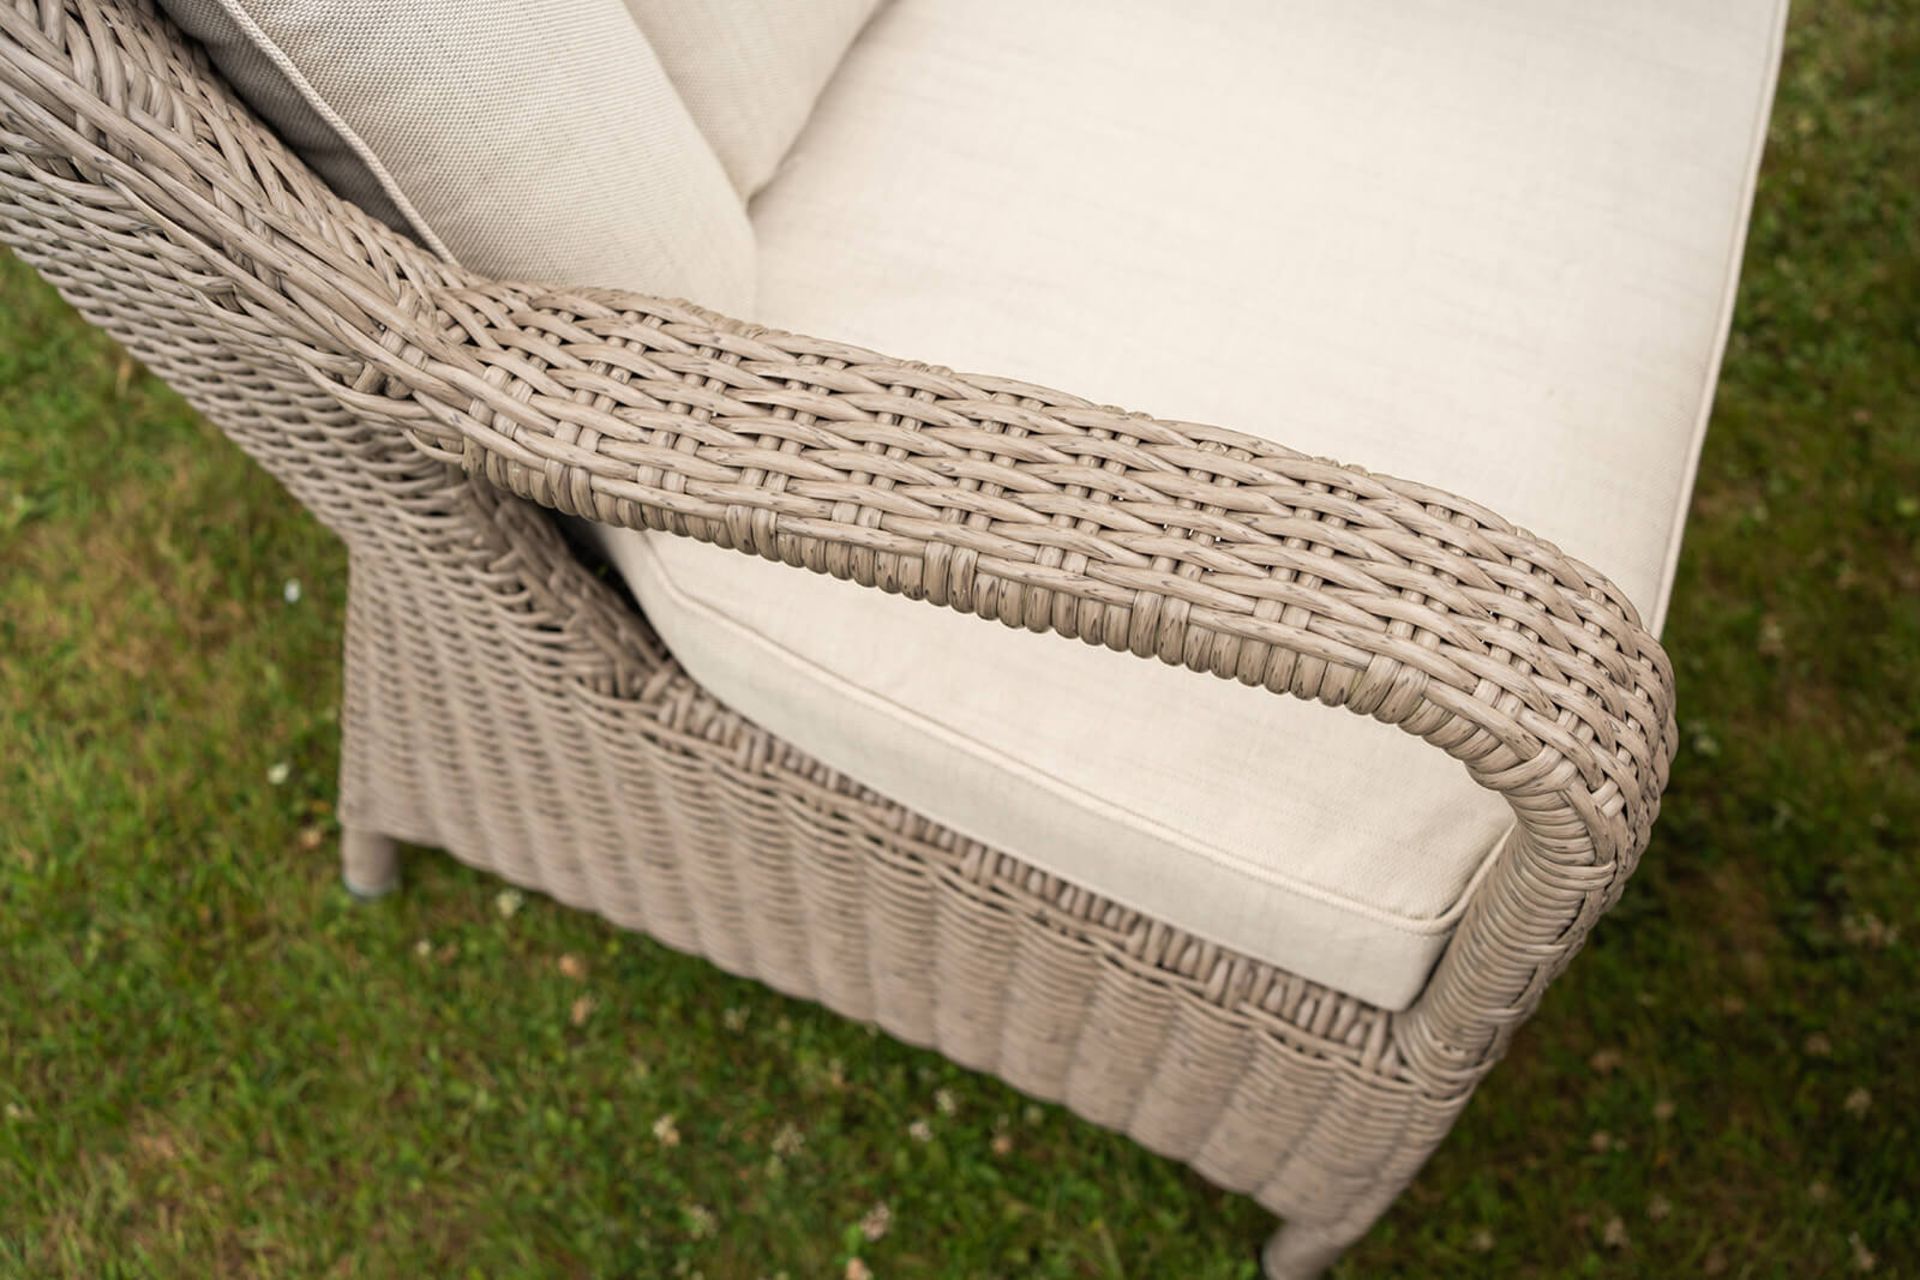 Brand New Moda Furniture 6 Seater Oval Outdoor Dining Set in Natural With Cream Cushions. RRP £ - Image 2 of 8